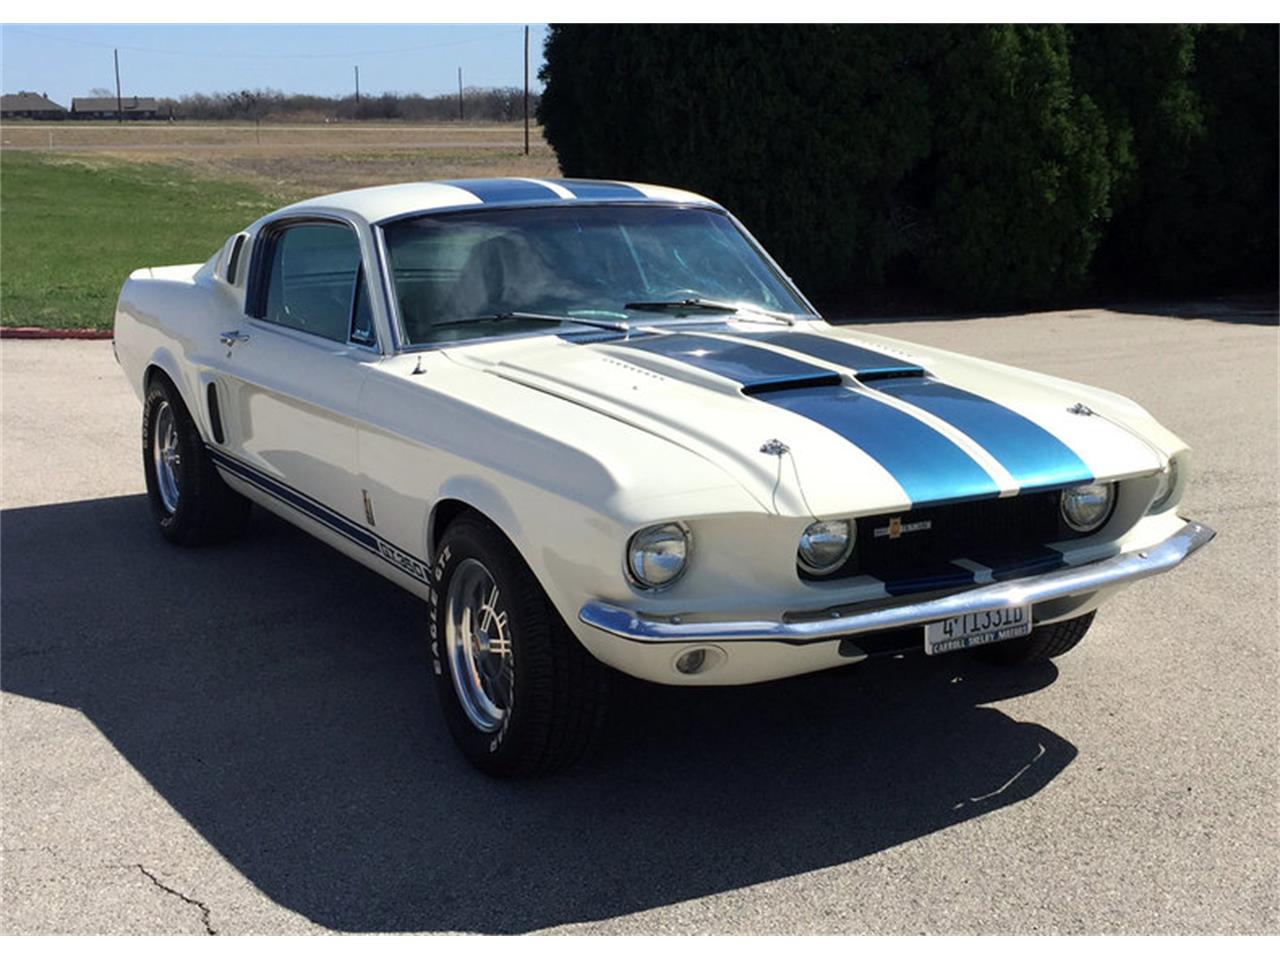 1967 Ford Mustang Shelby GT350 Tribute for Sale | ClassicCars.com | CC ...